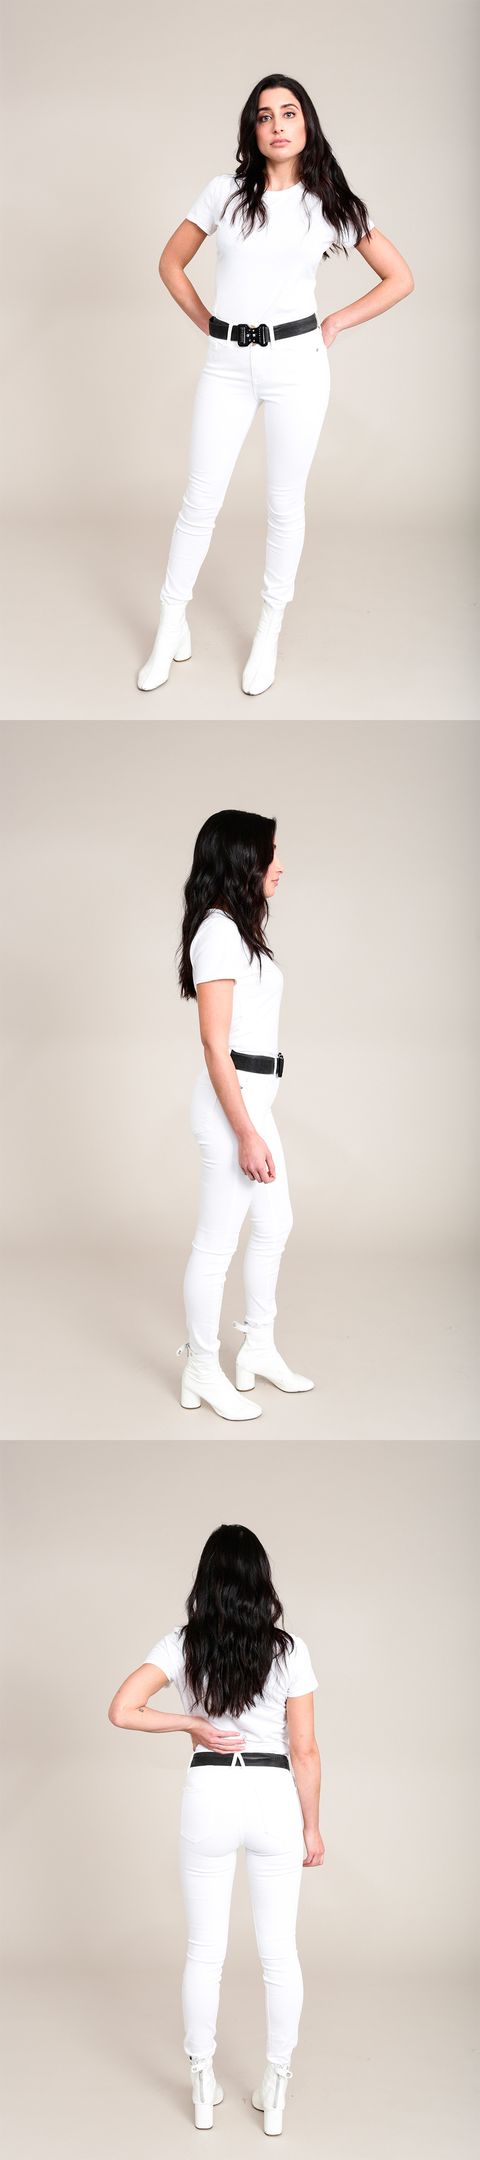 Shoulder, Human leg, Standing, Joint, White, Elbow, Style, Waist, Knee, Active pants, 